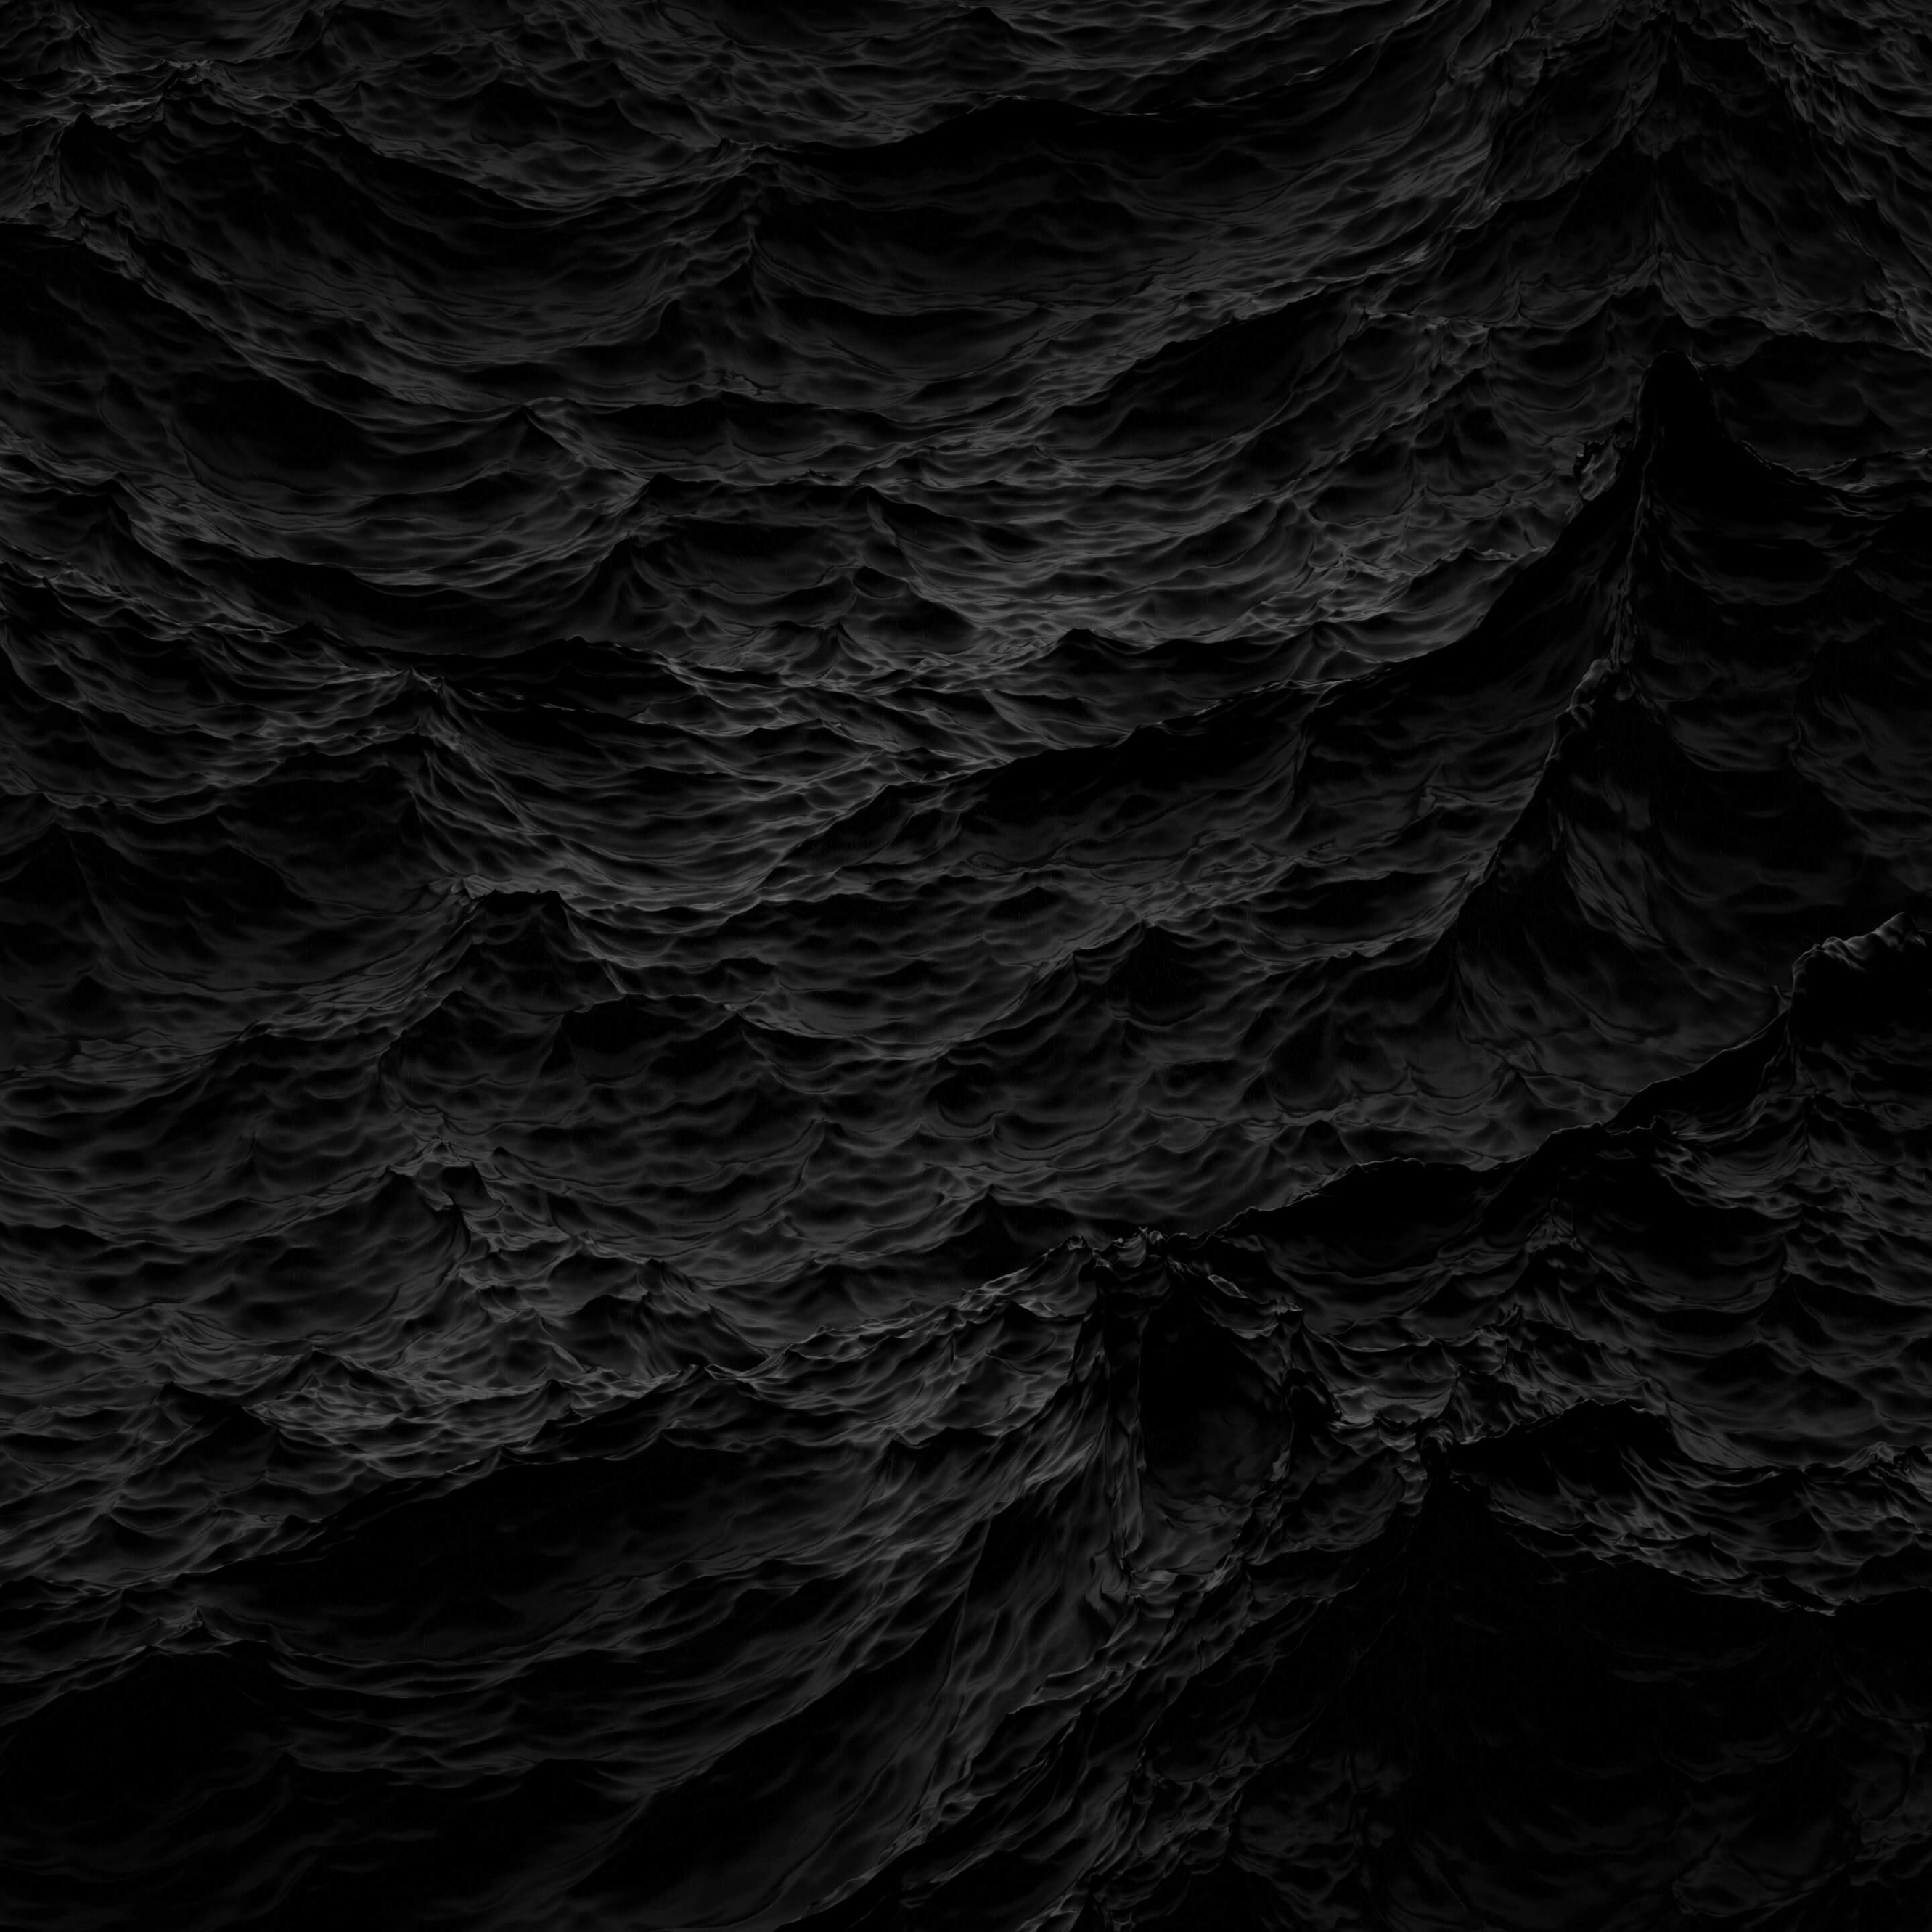 Black Waves Wallpaper for Apple iPhone 6 Plus